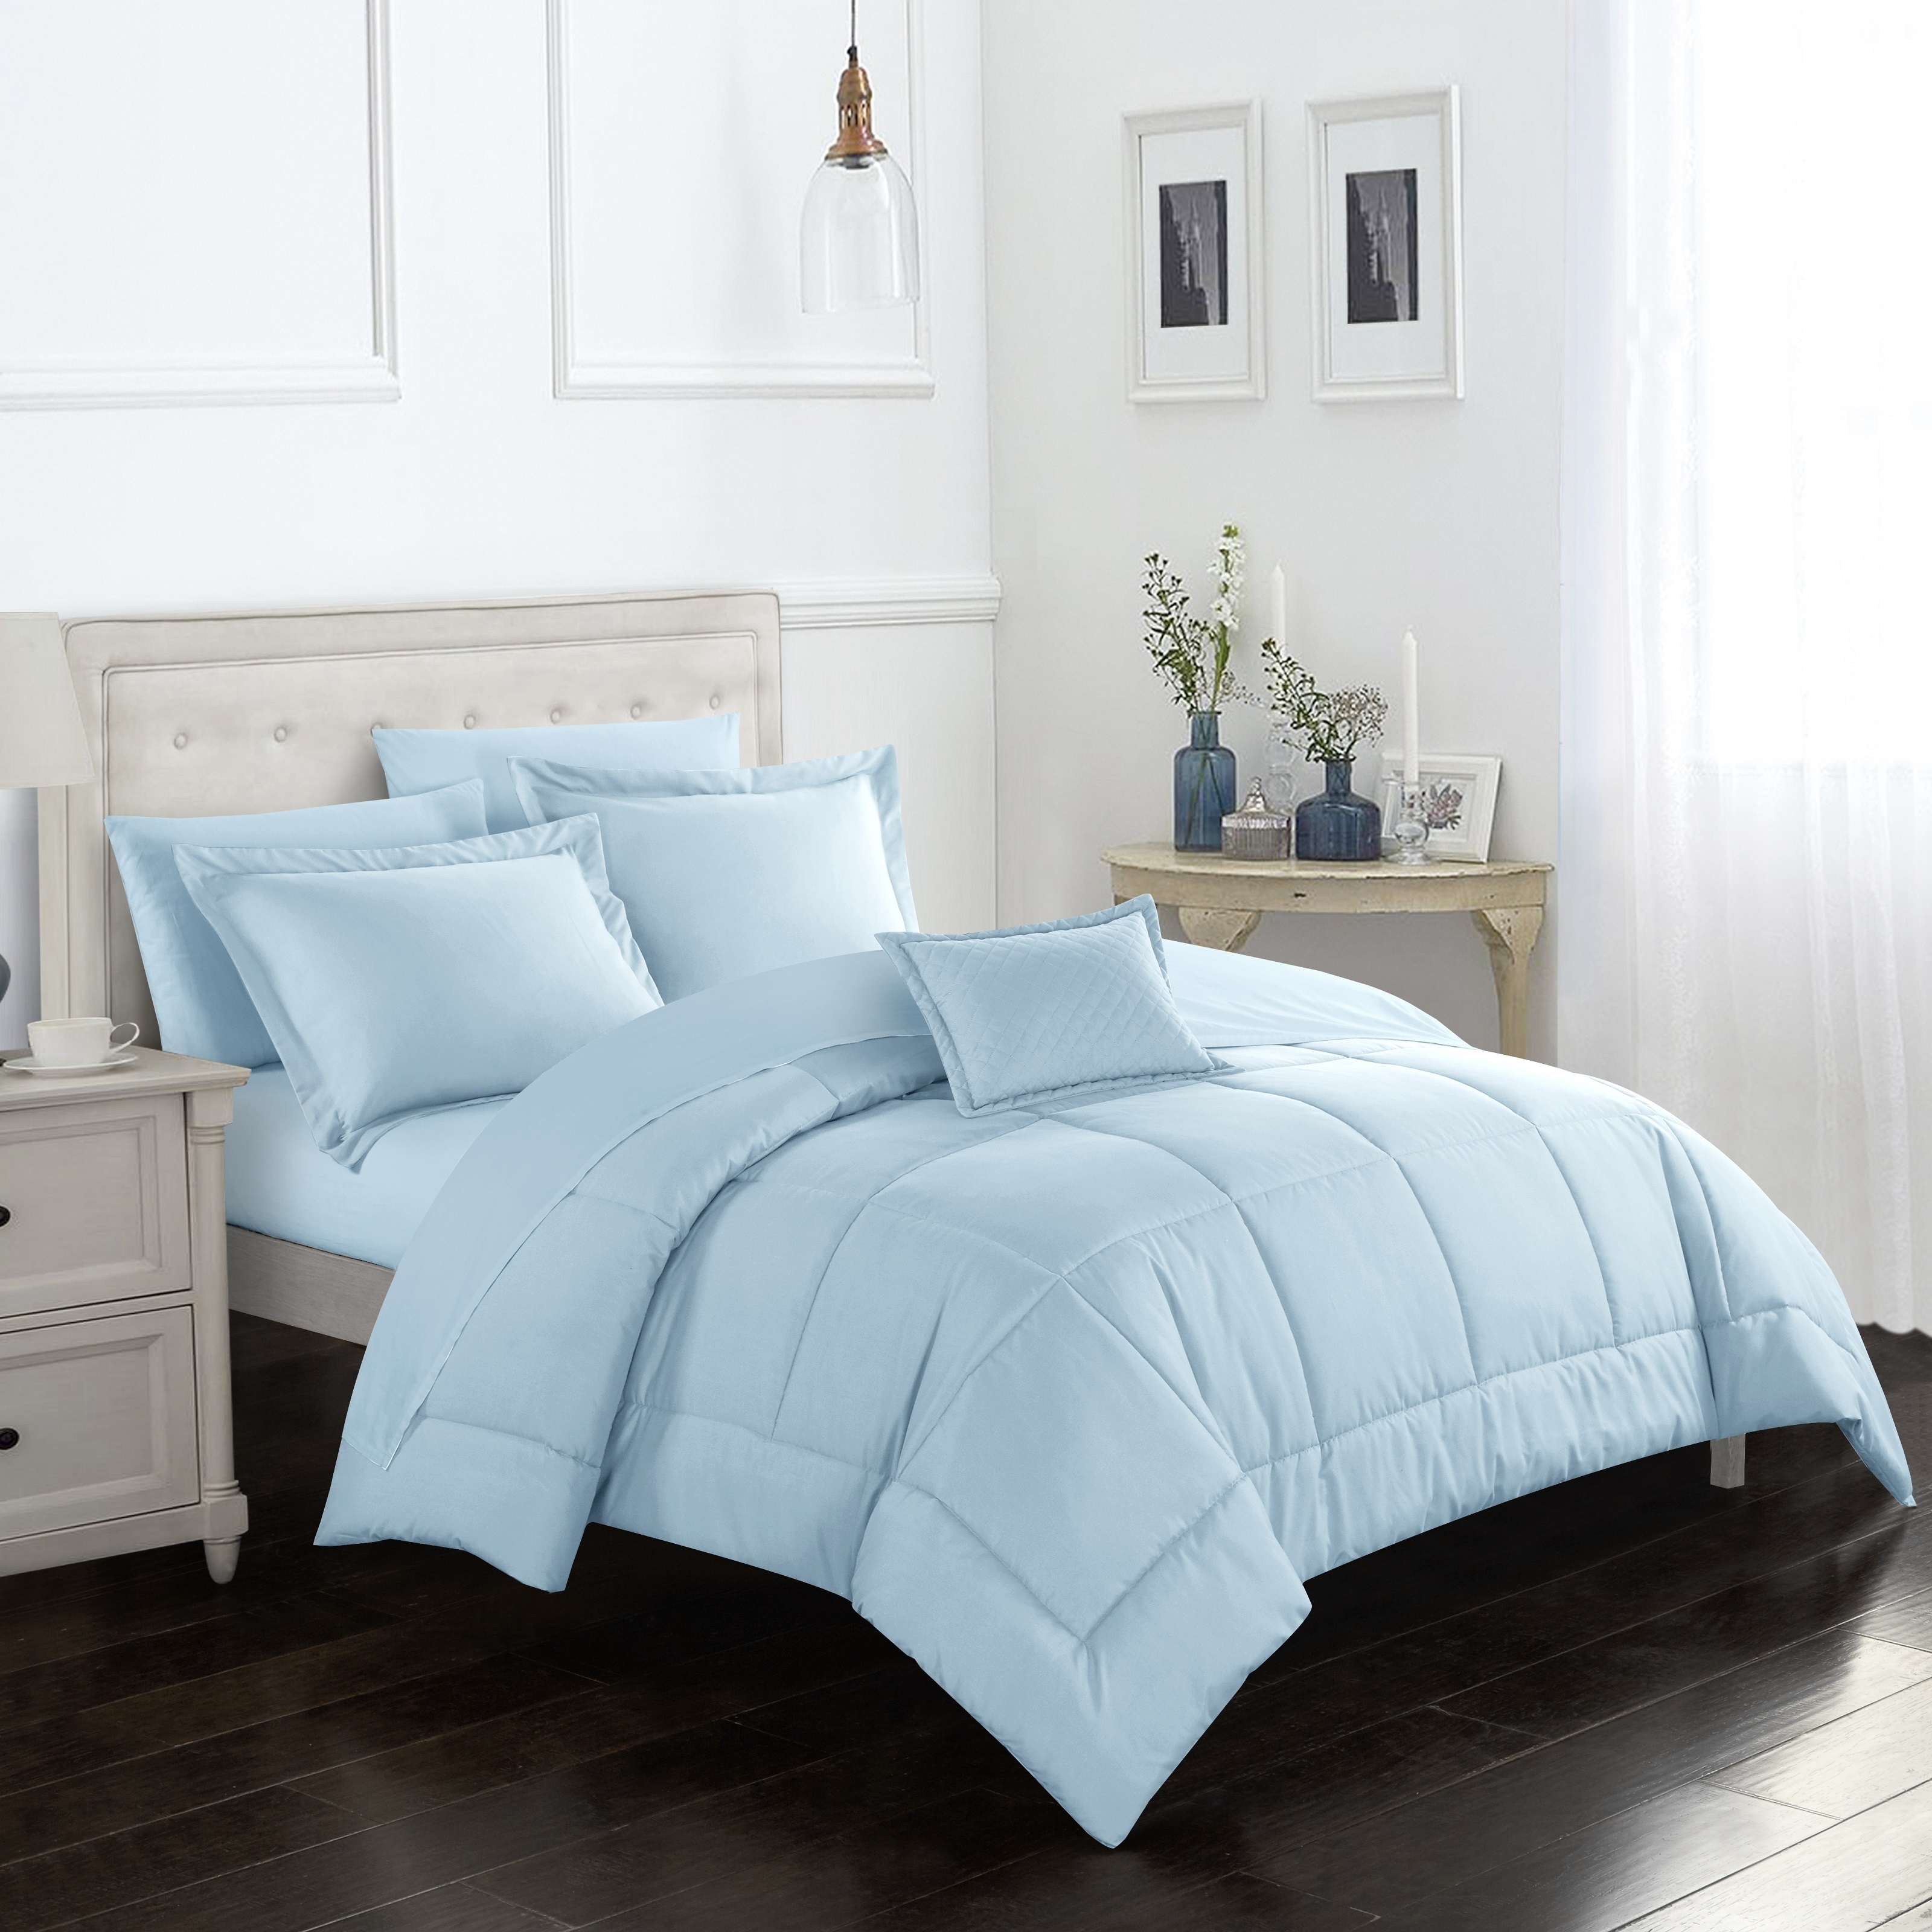 Joshuah 8 Or 6 Piece Comforter Set Pieced Solid Color Stitched With Sheet Set - Brick, King